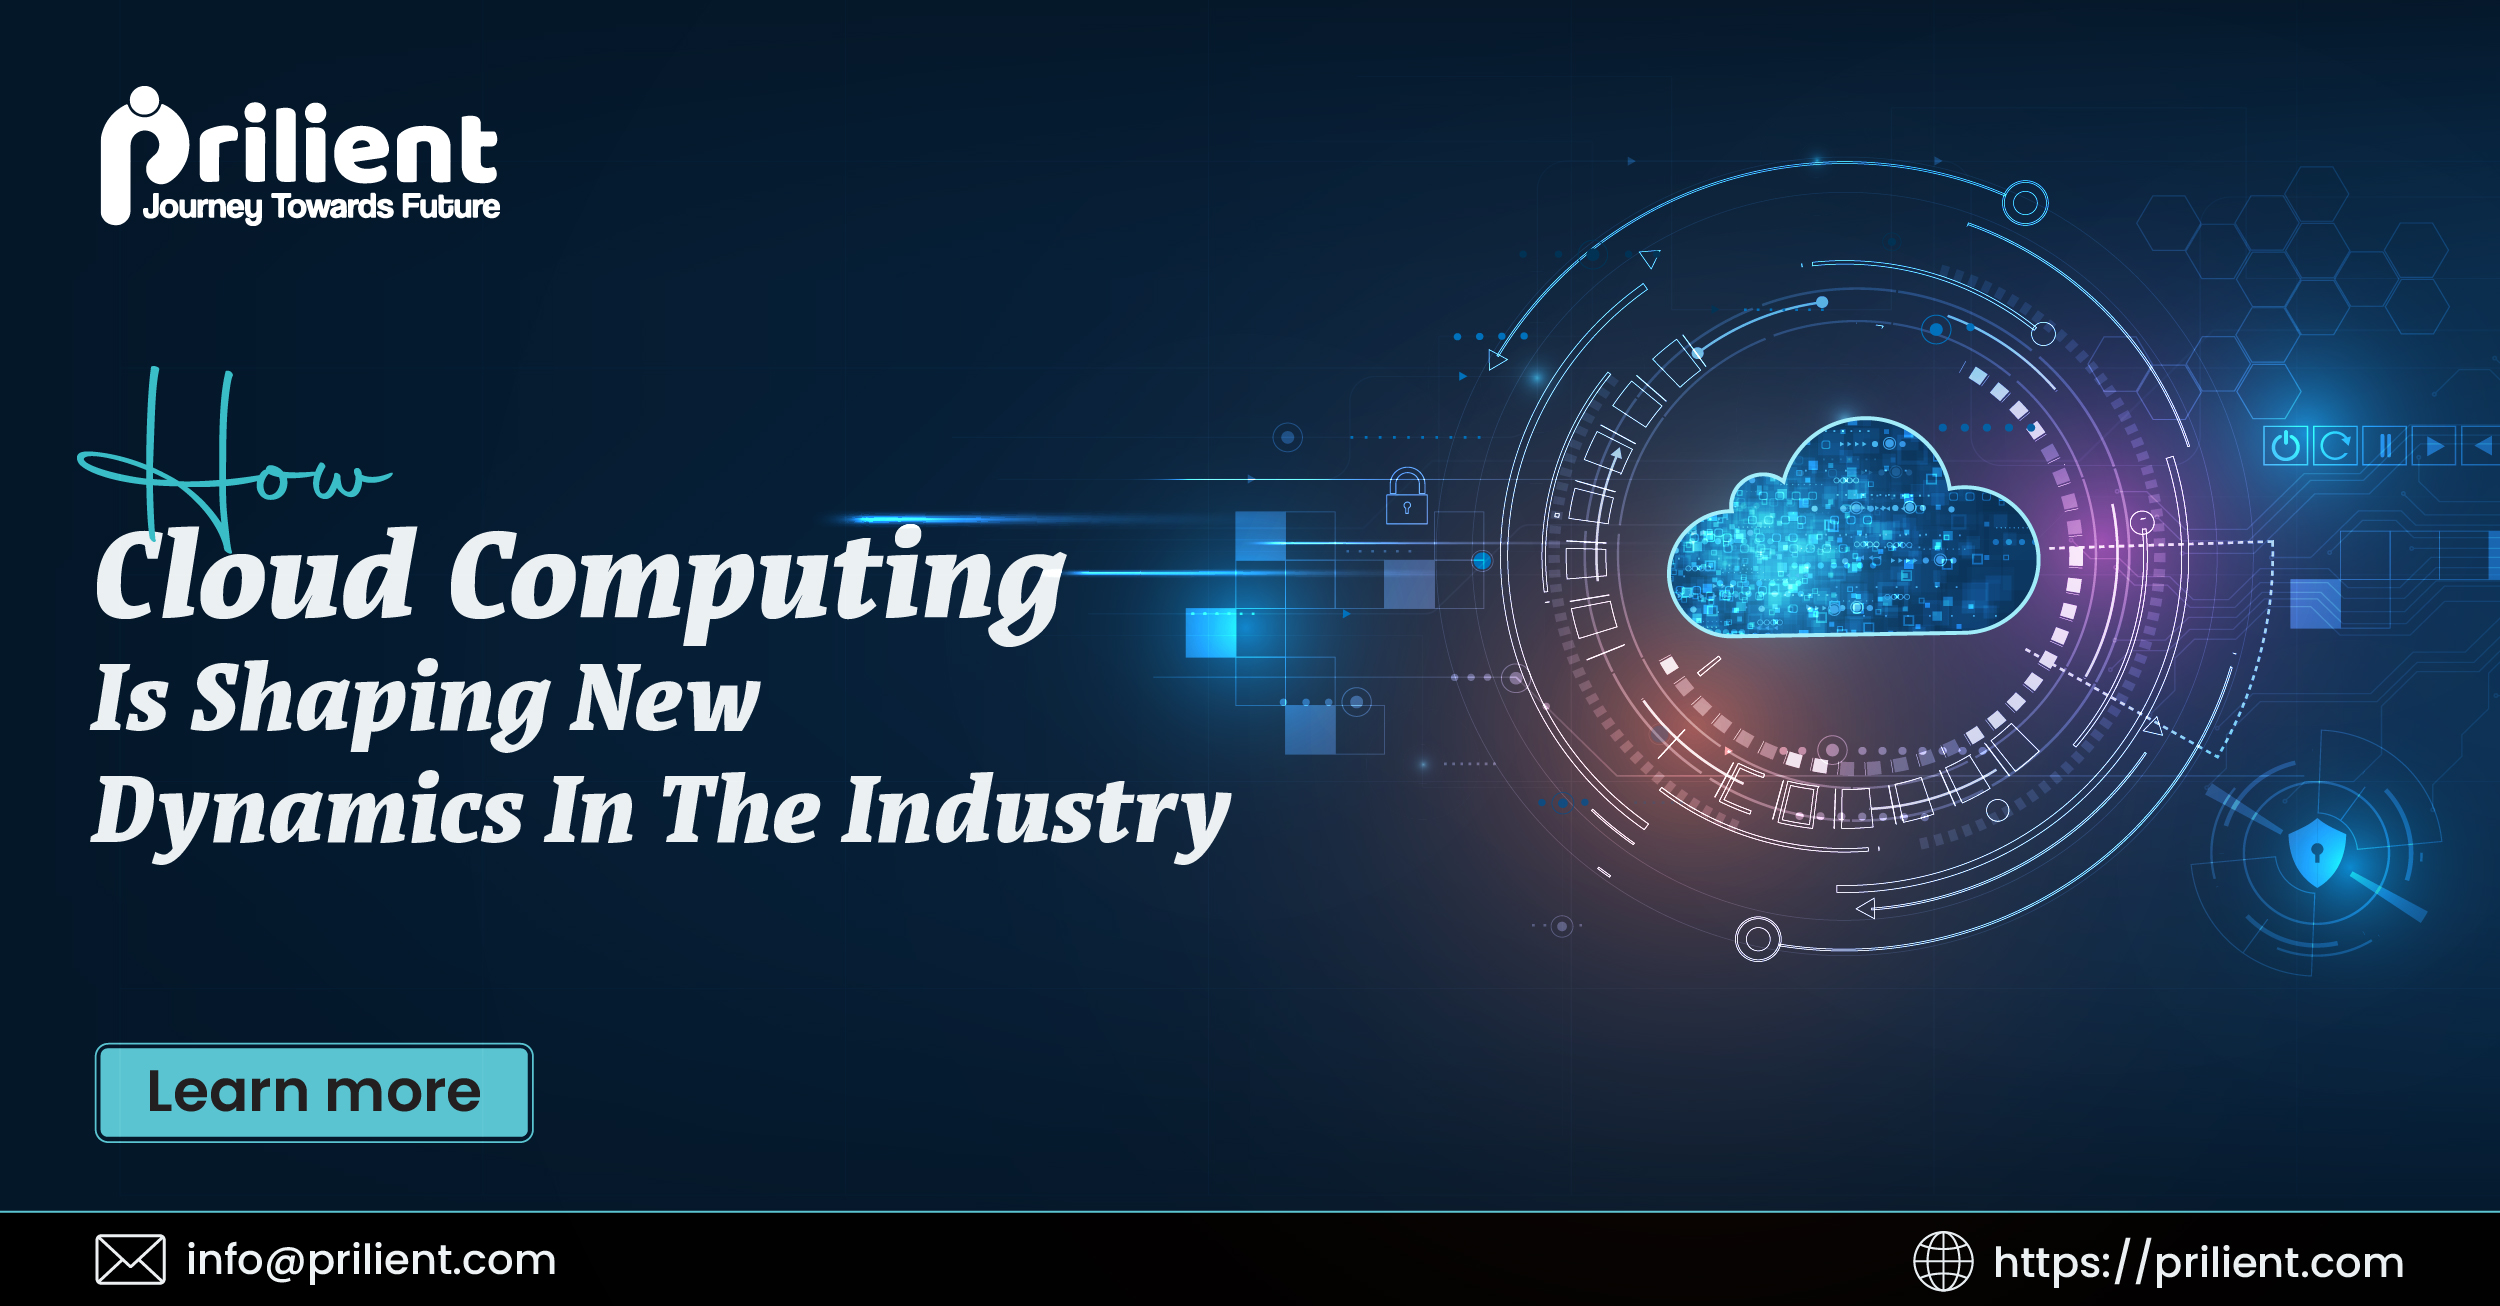 How Cloud Computing Is Shaping New Dynamics In The Industry